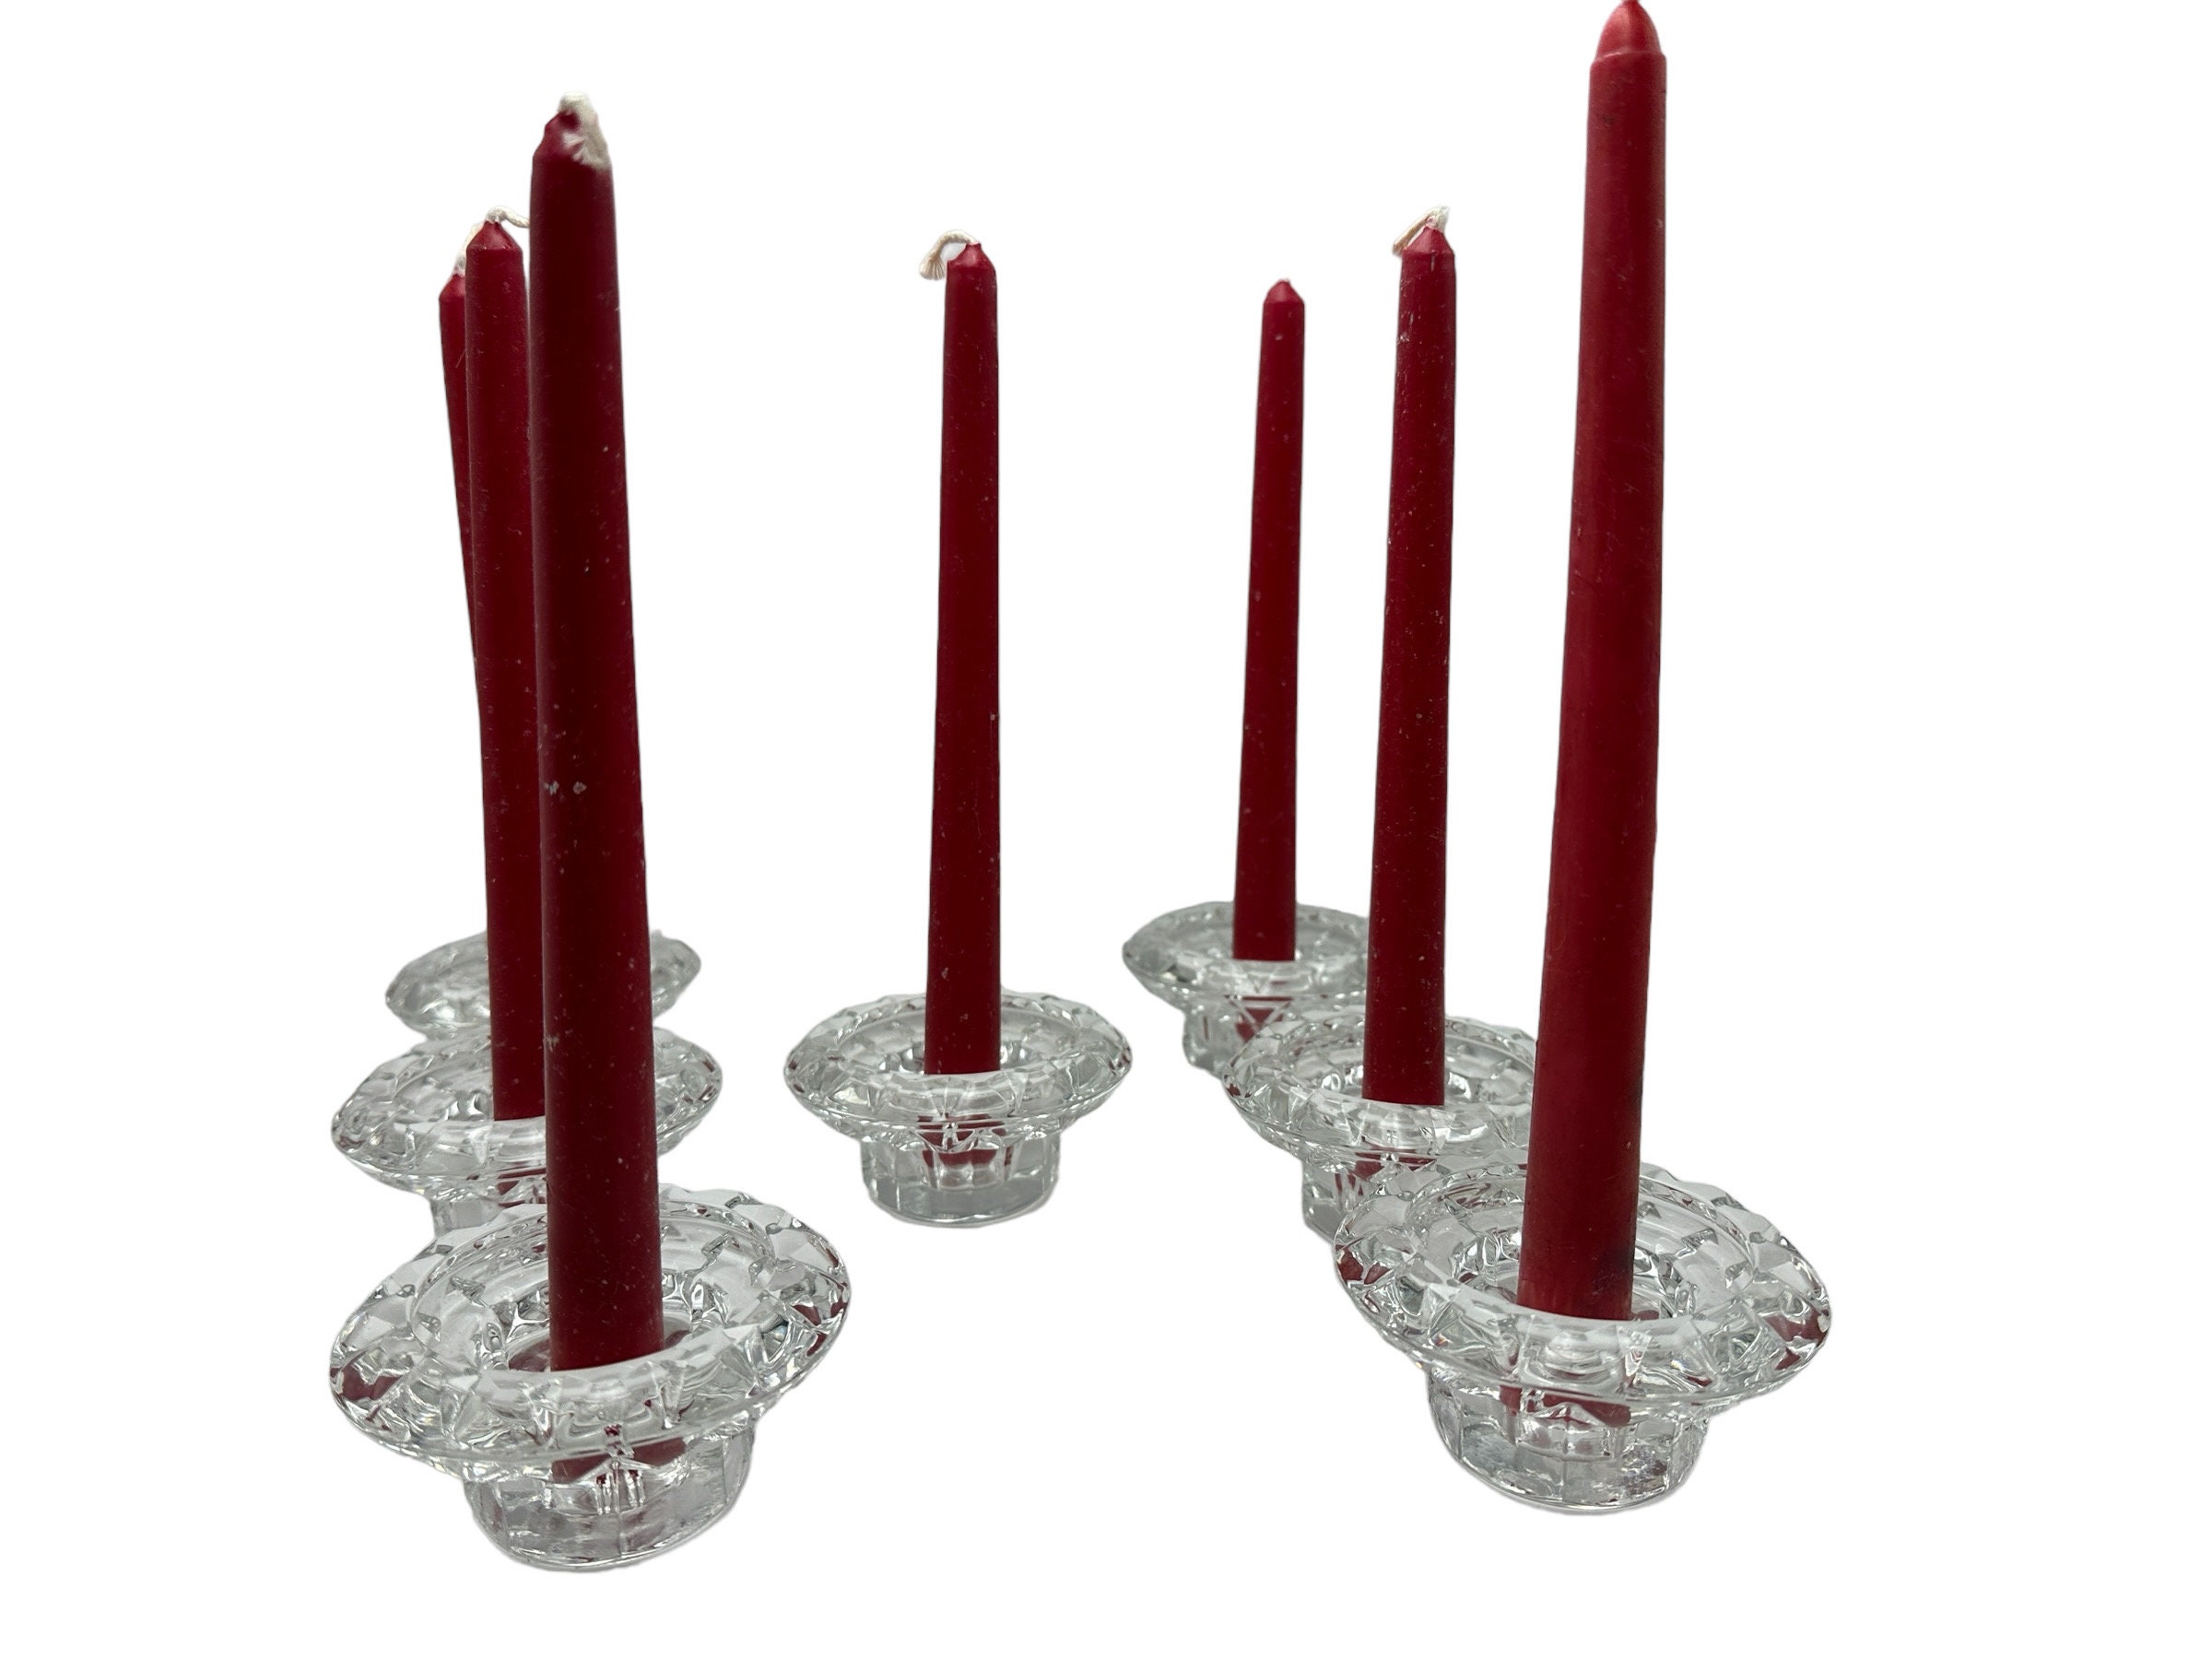 Bolsius Unscented Ivory Taper - Houshold Candles Pack of 50-11